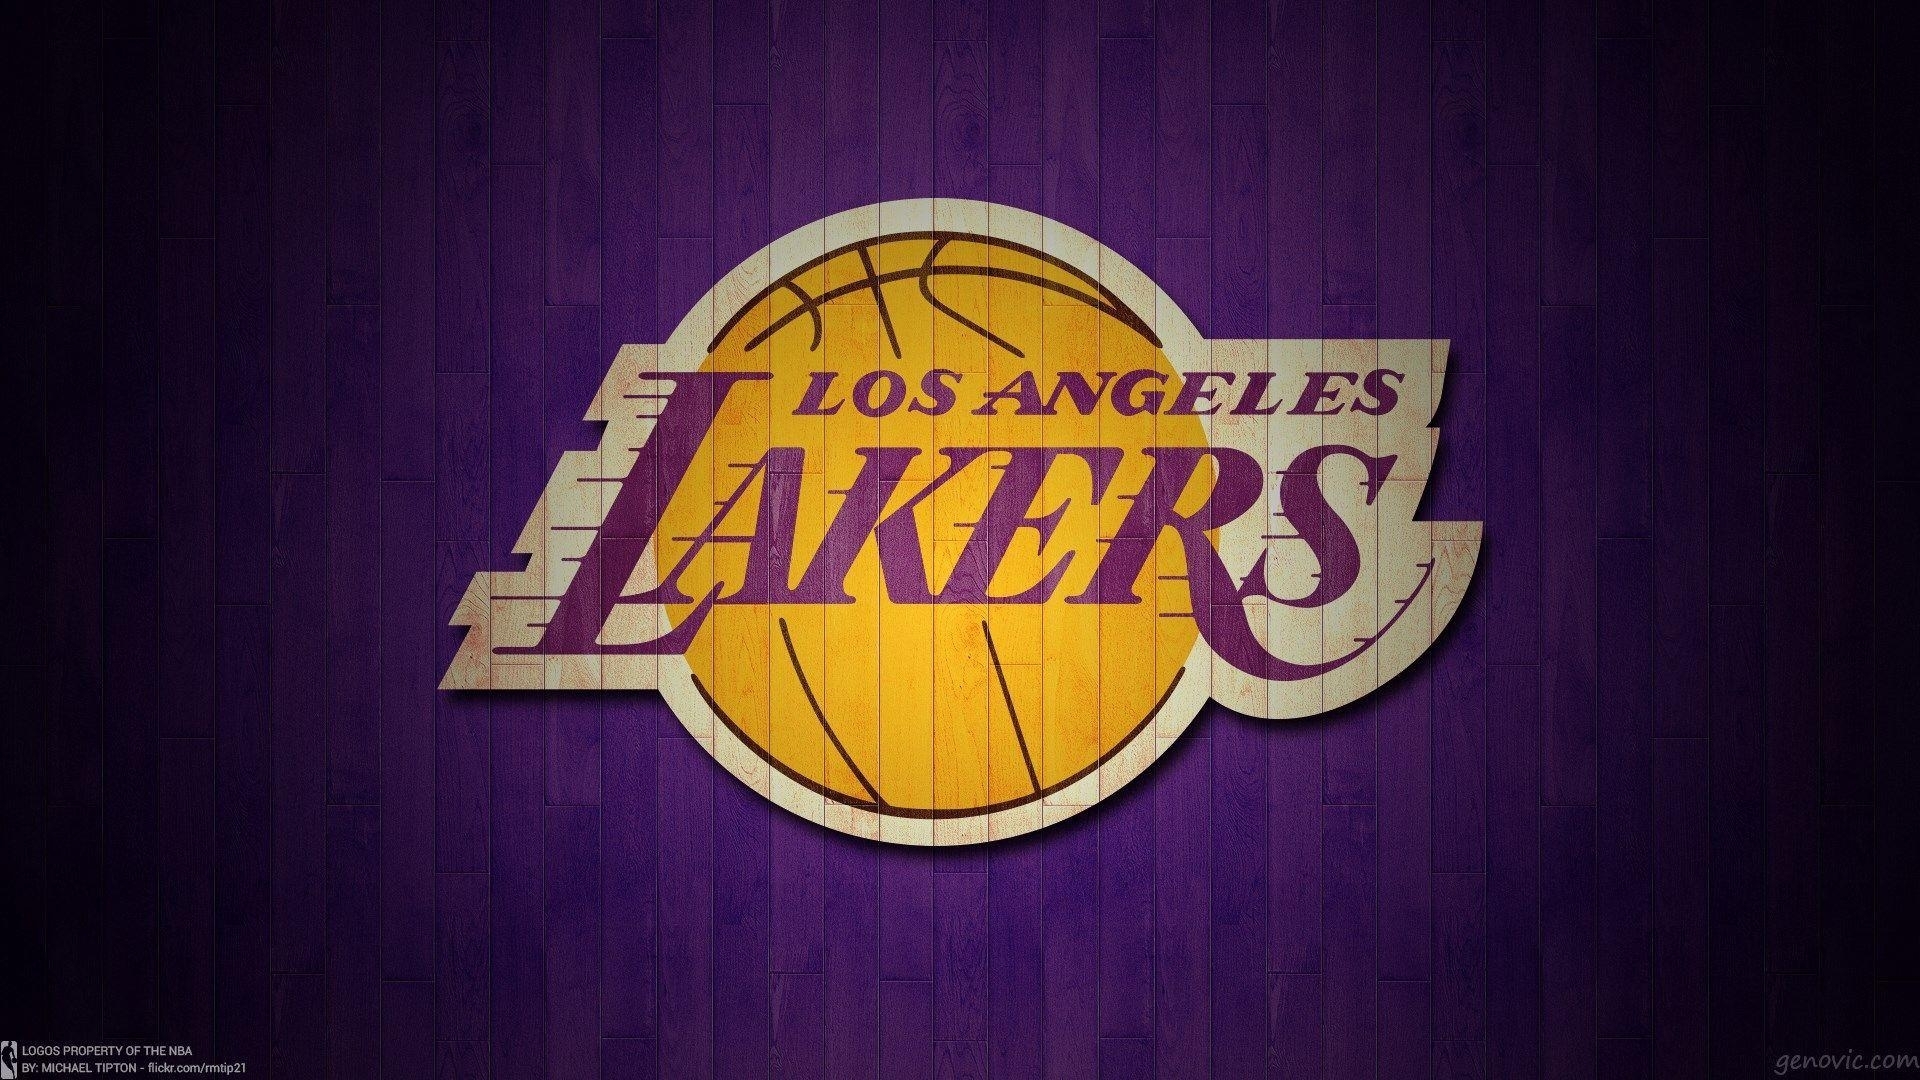 10 Latest Los Angeles Lakers Wallpaper Hd FULL HD 1080p For PC Background